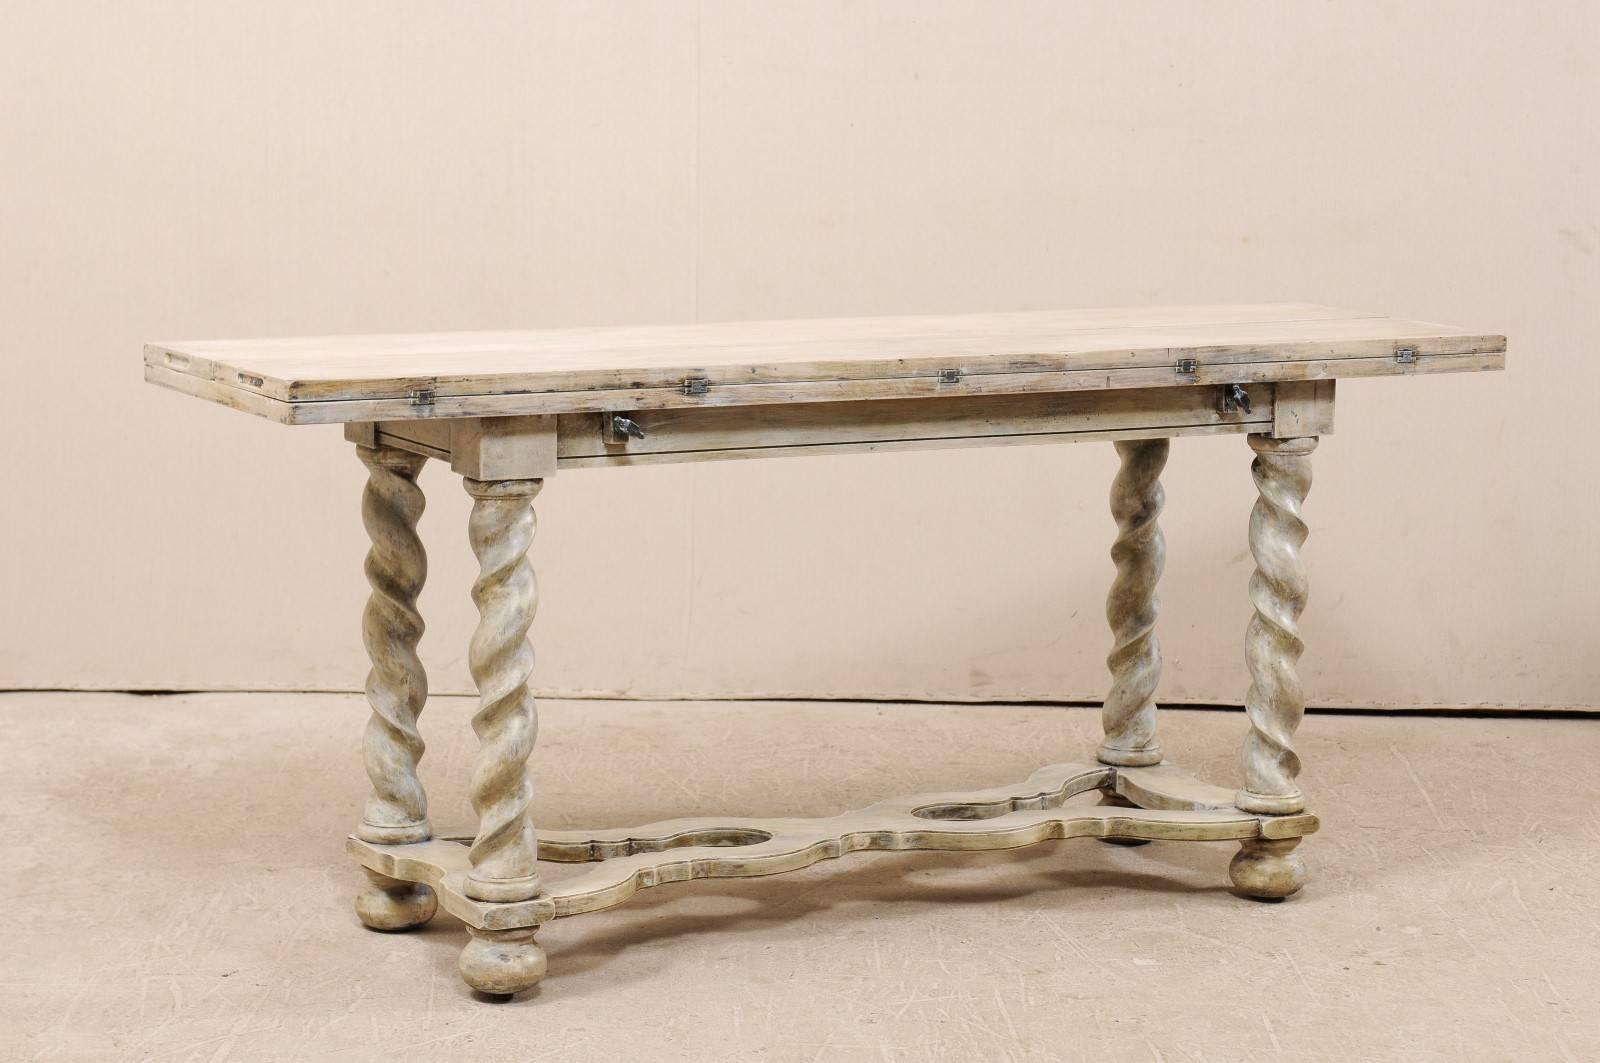 A vintage American convertible painted wood console table. This unique table offers a variety of uses with the folding function, in which the extending leaves fold inward and sit upon the base of the table, giving it more of a console look. This